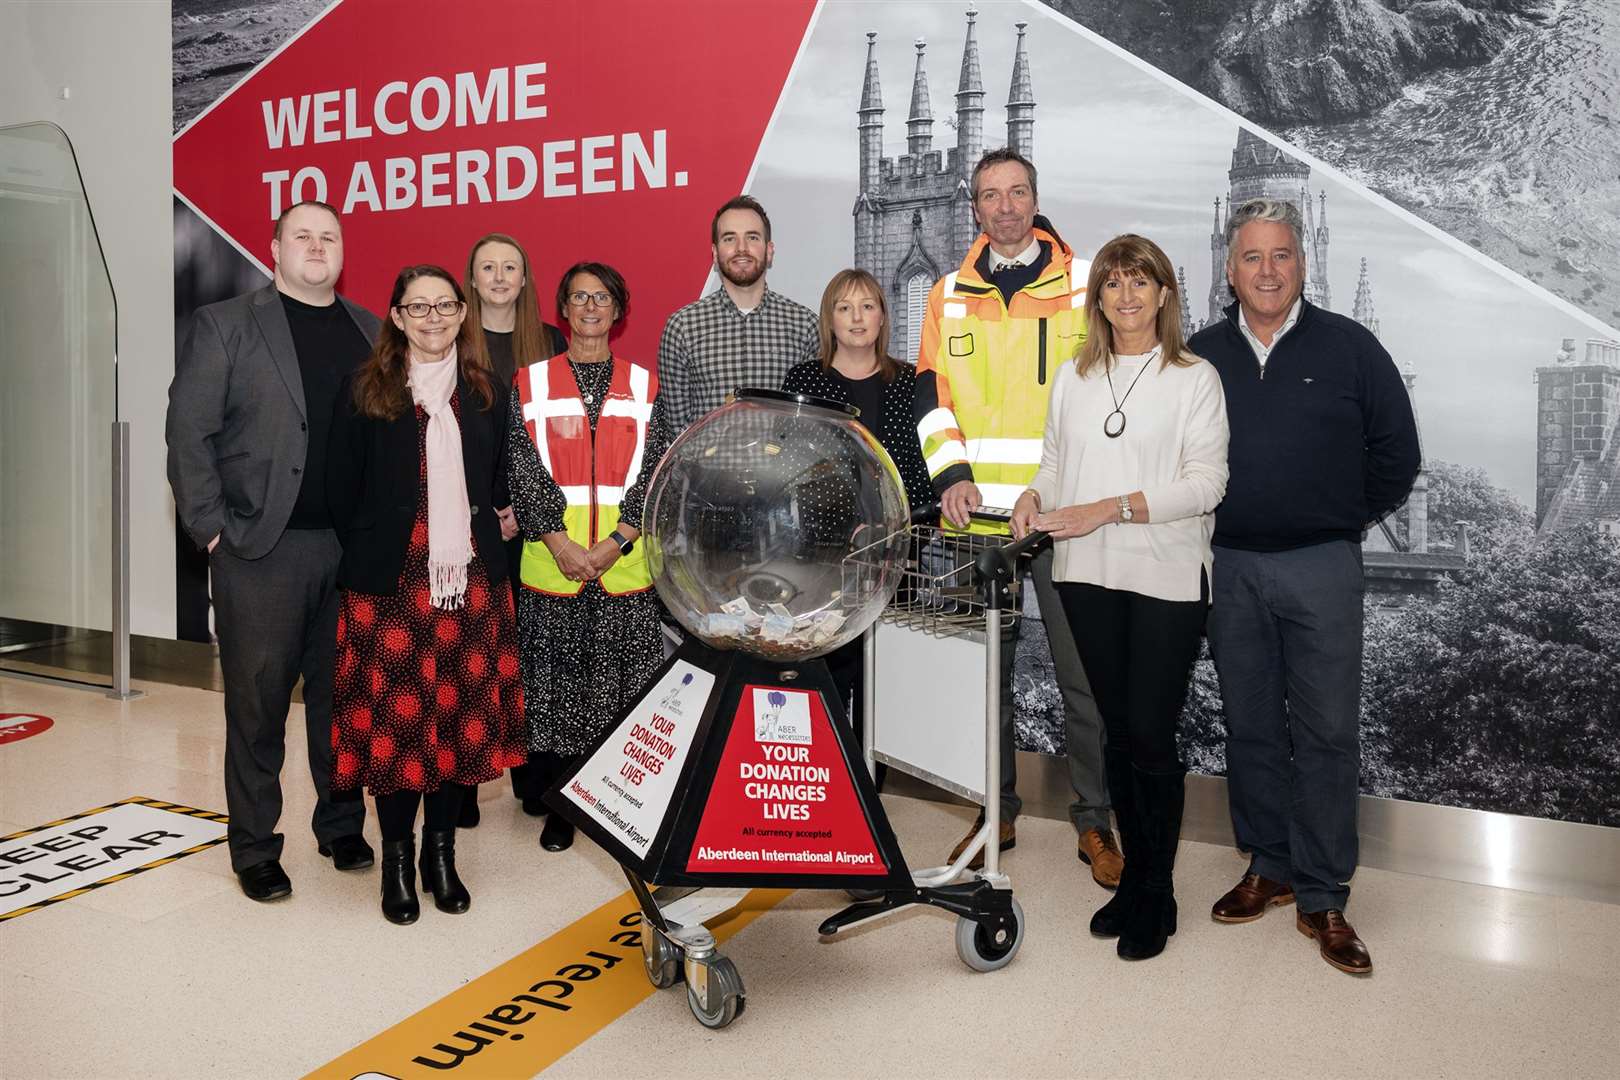 Representatives from Aberdeen International Airport's charity management group and AberNecessities.